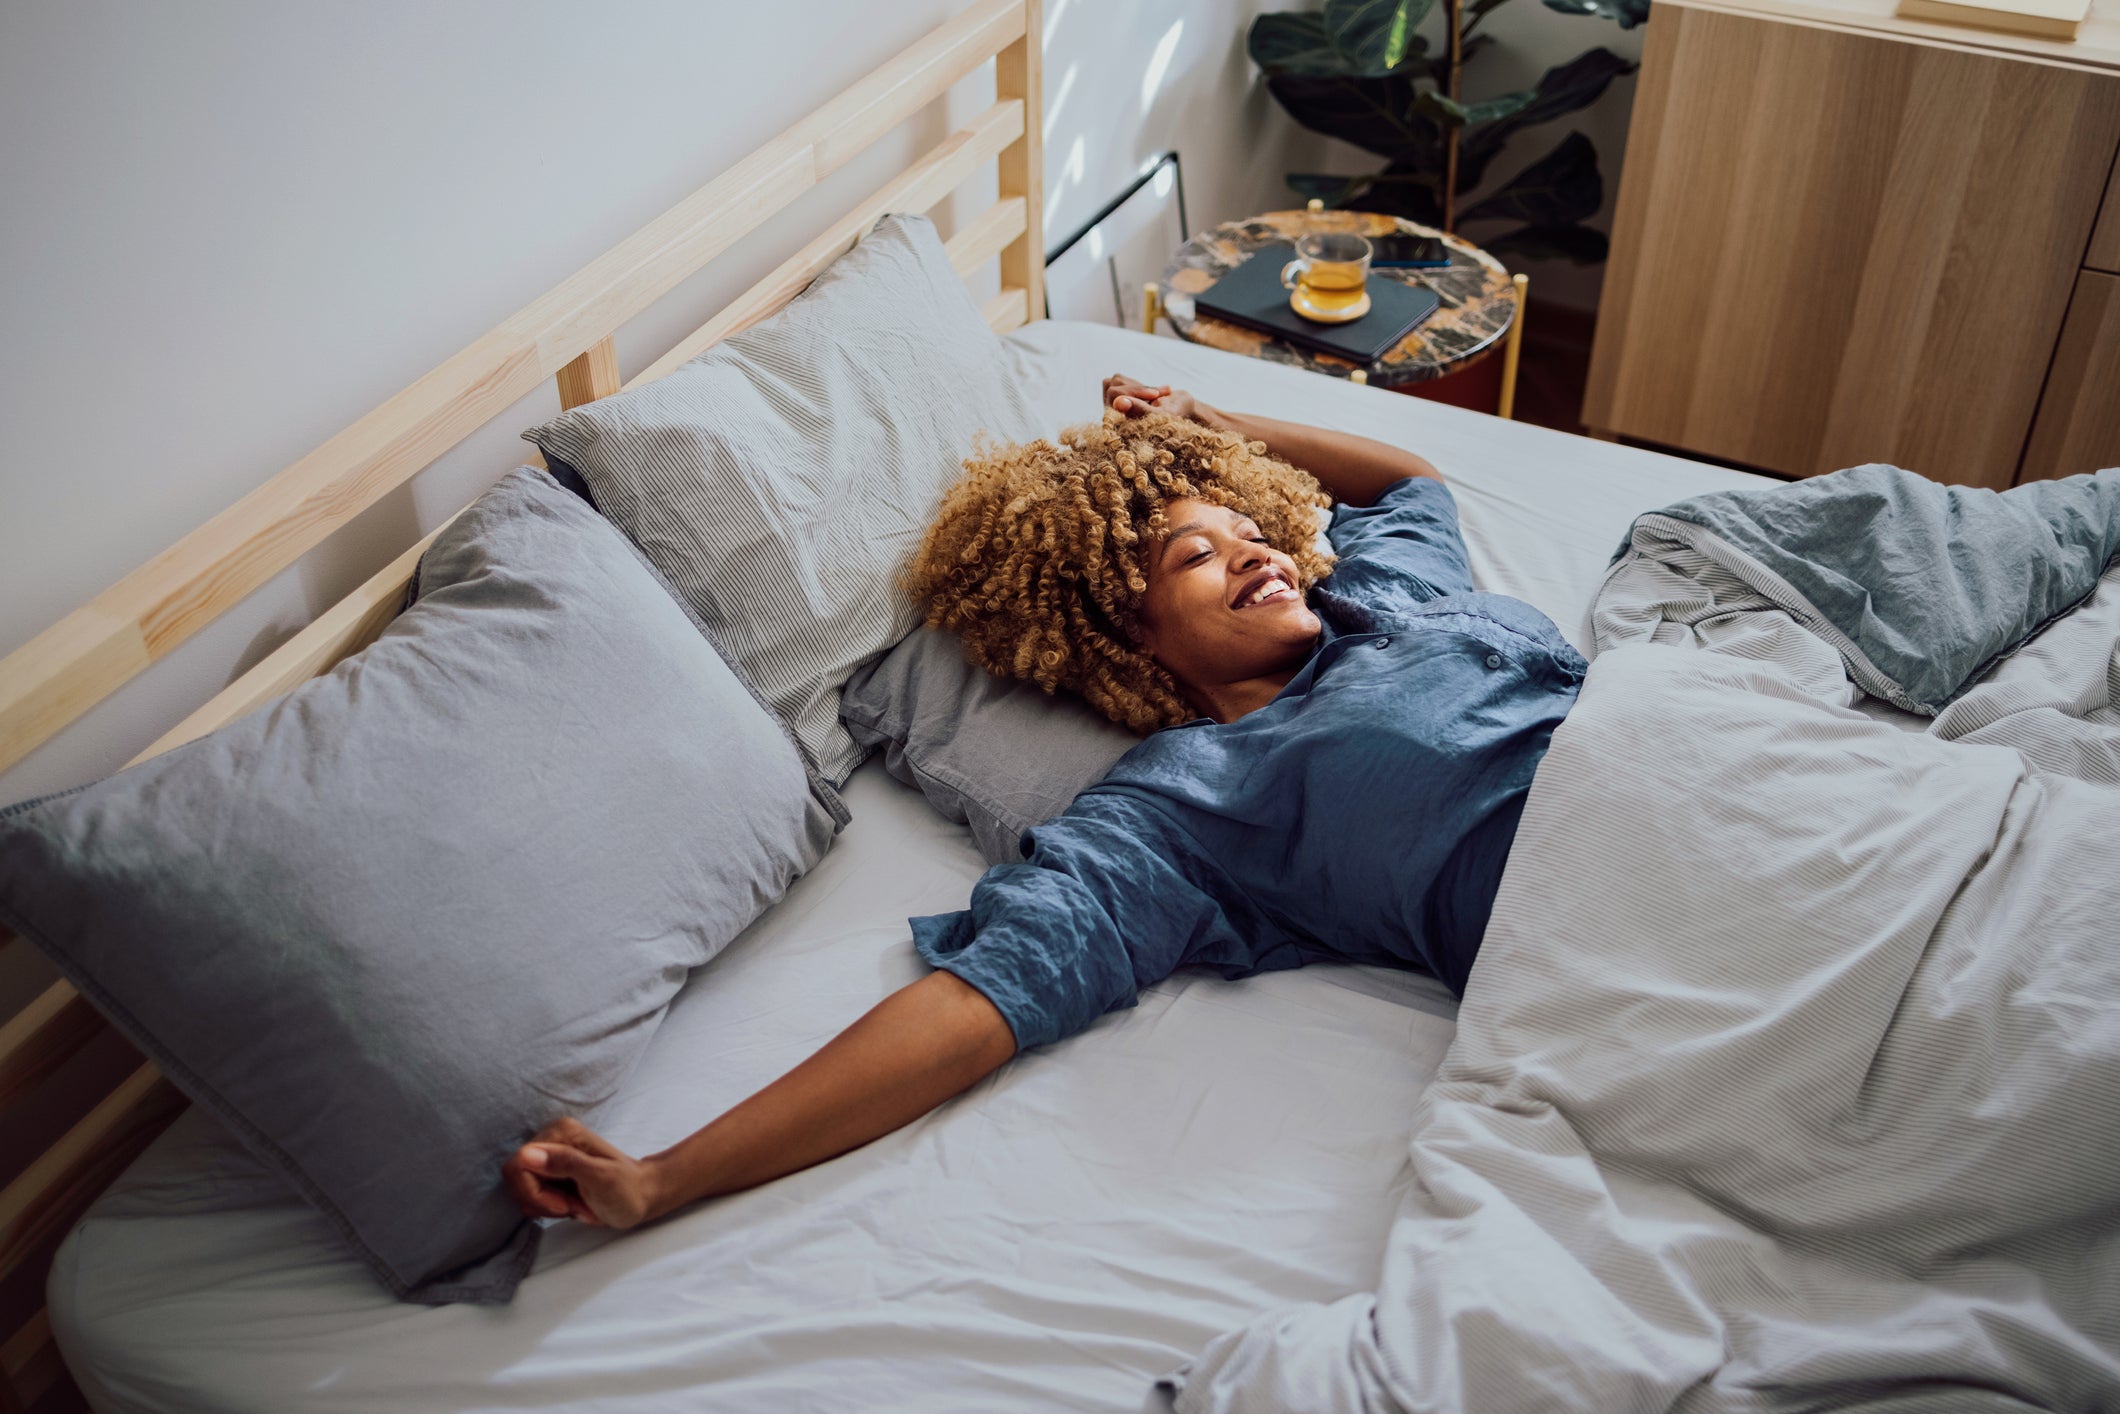 ‘Bed Rotting’ Is The Perfect Self-Care Trend To Combat Rise-And-Grind Culture